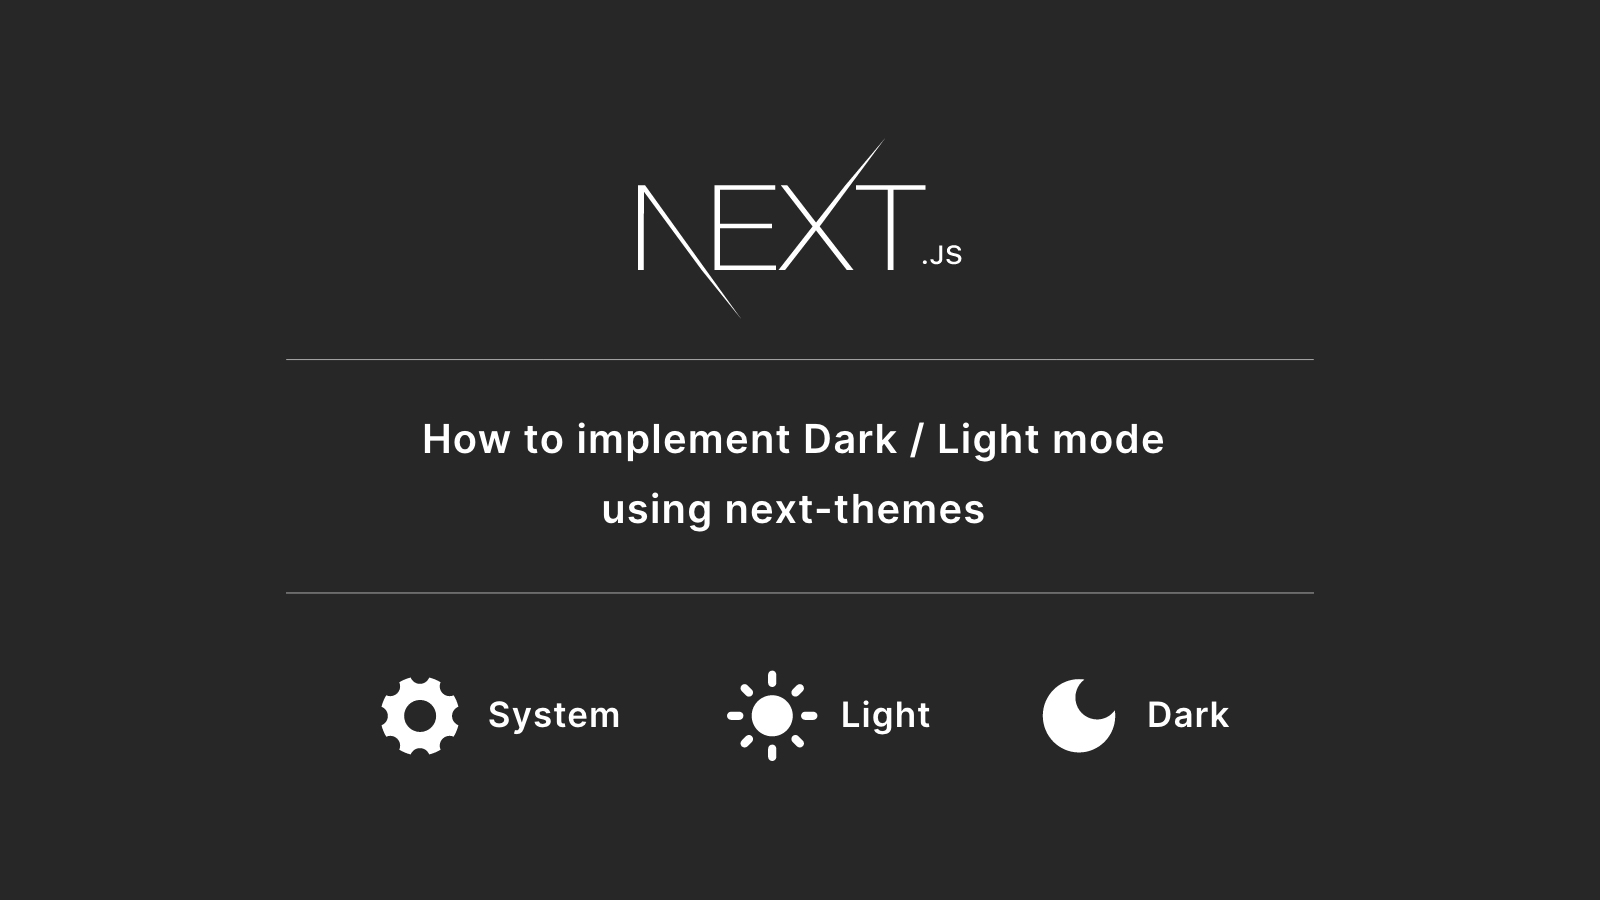 How to implement Dark mode with Next.js and CSS variables